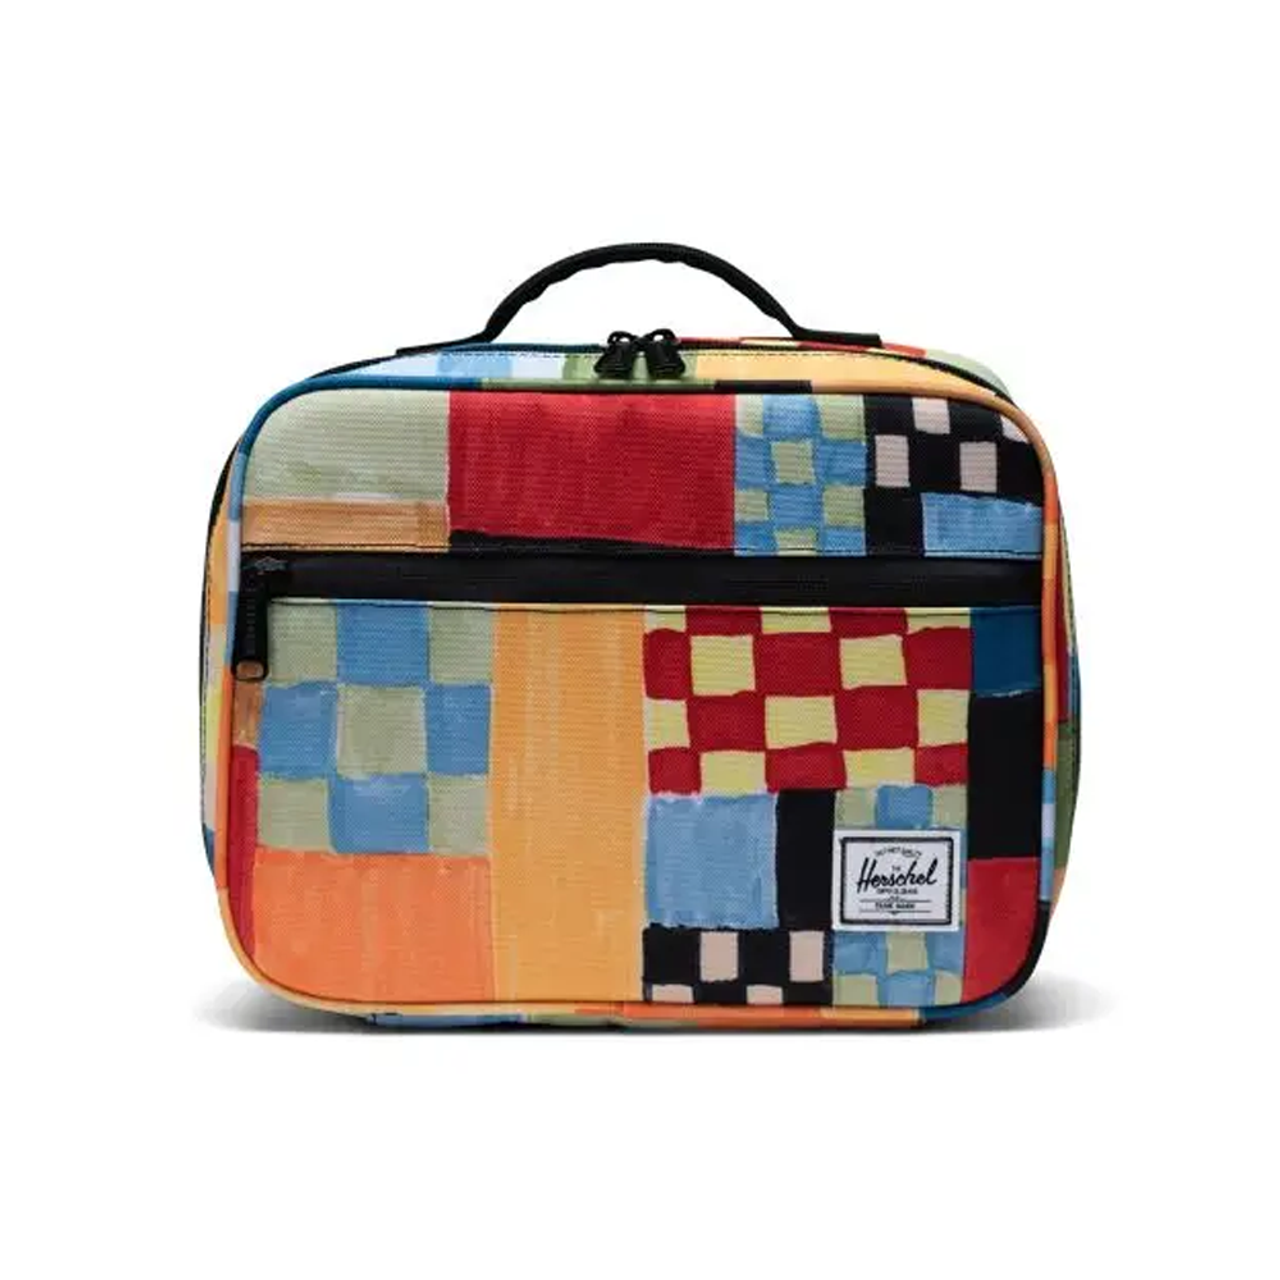 https://cdn11.bigcommerce.com/s-p6xvlcn3x2/images/stencil/1280x1280/products/31305/301166/Herschel-Pop-Quiz-Lunch-Box-600D-Checkered-Patch-OS-10227-05725-OS_300839__01915.1678129599.png?c=1